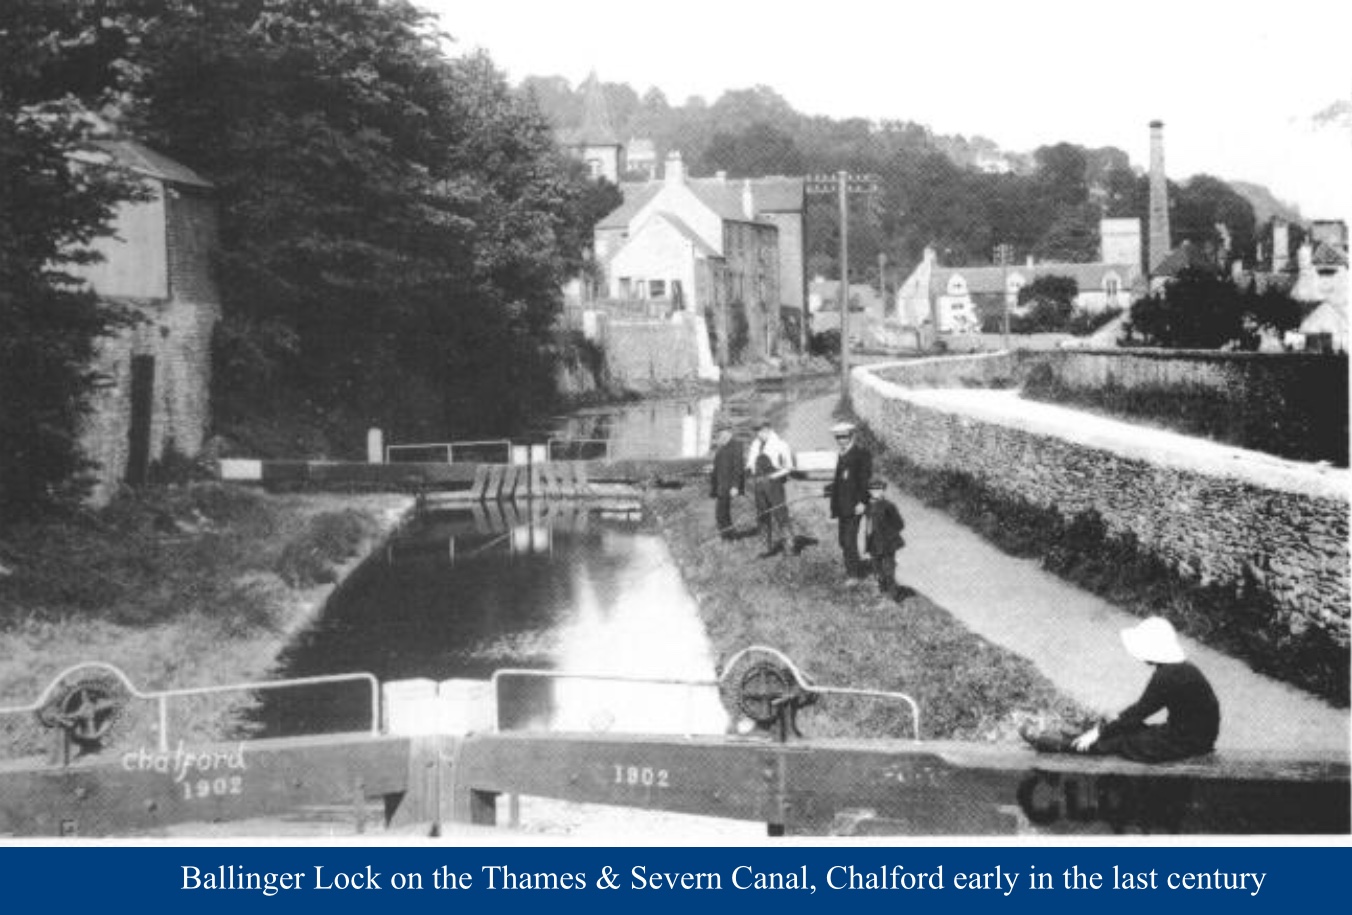 Cotswold Granny: Ballinger Lock on the Thames & Severn Canal, Chalford, in Margaret’s youth.